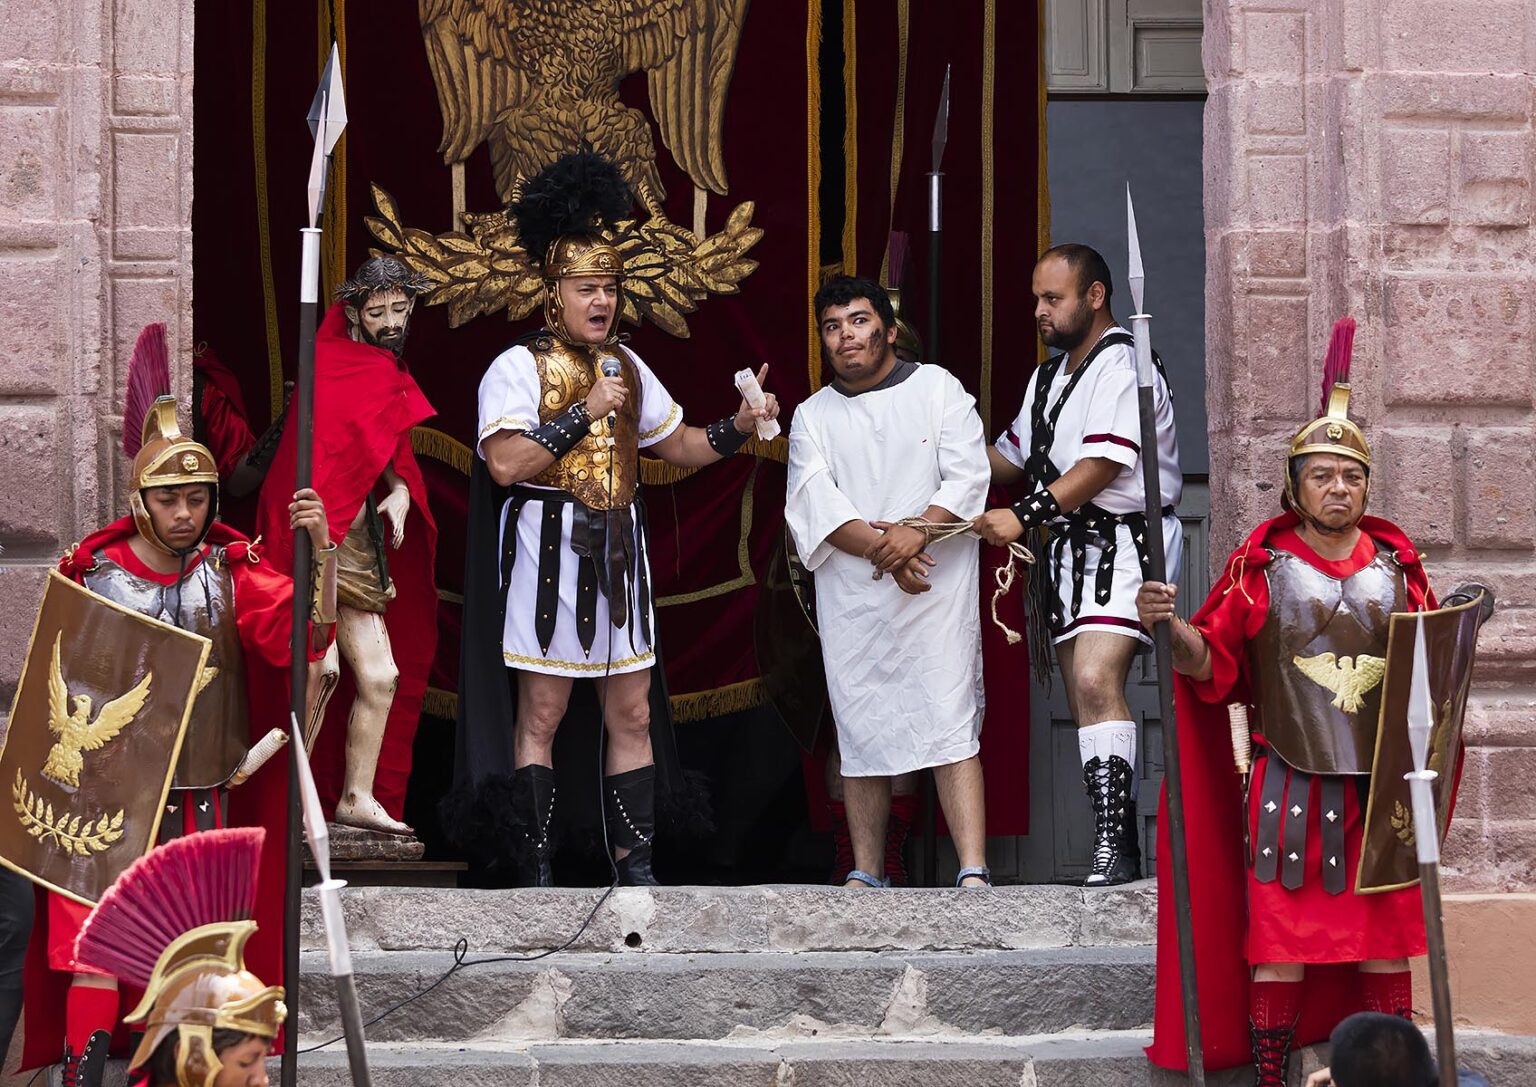 ROMAN SOLDIERS and PONTIUS PILATE in a reenactment on the steps of the SAN RAFAEL chapel start the Good Friday Procession Santo Encuentro - SAN MIGUEL DE ALLENDE, MEXICO